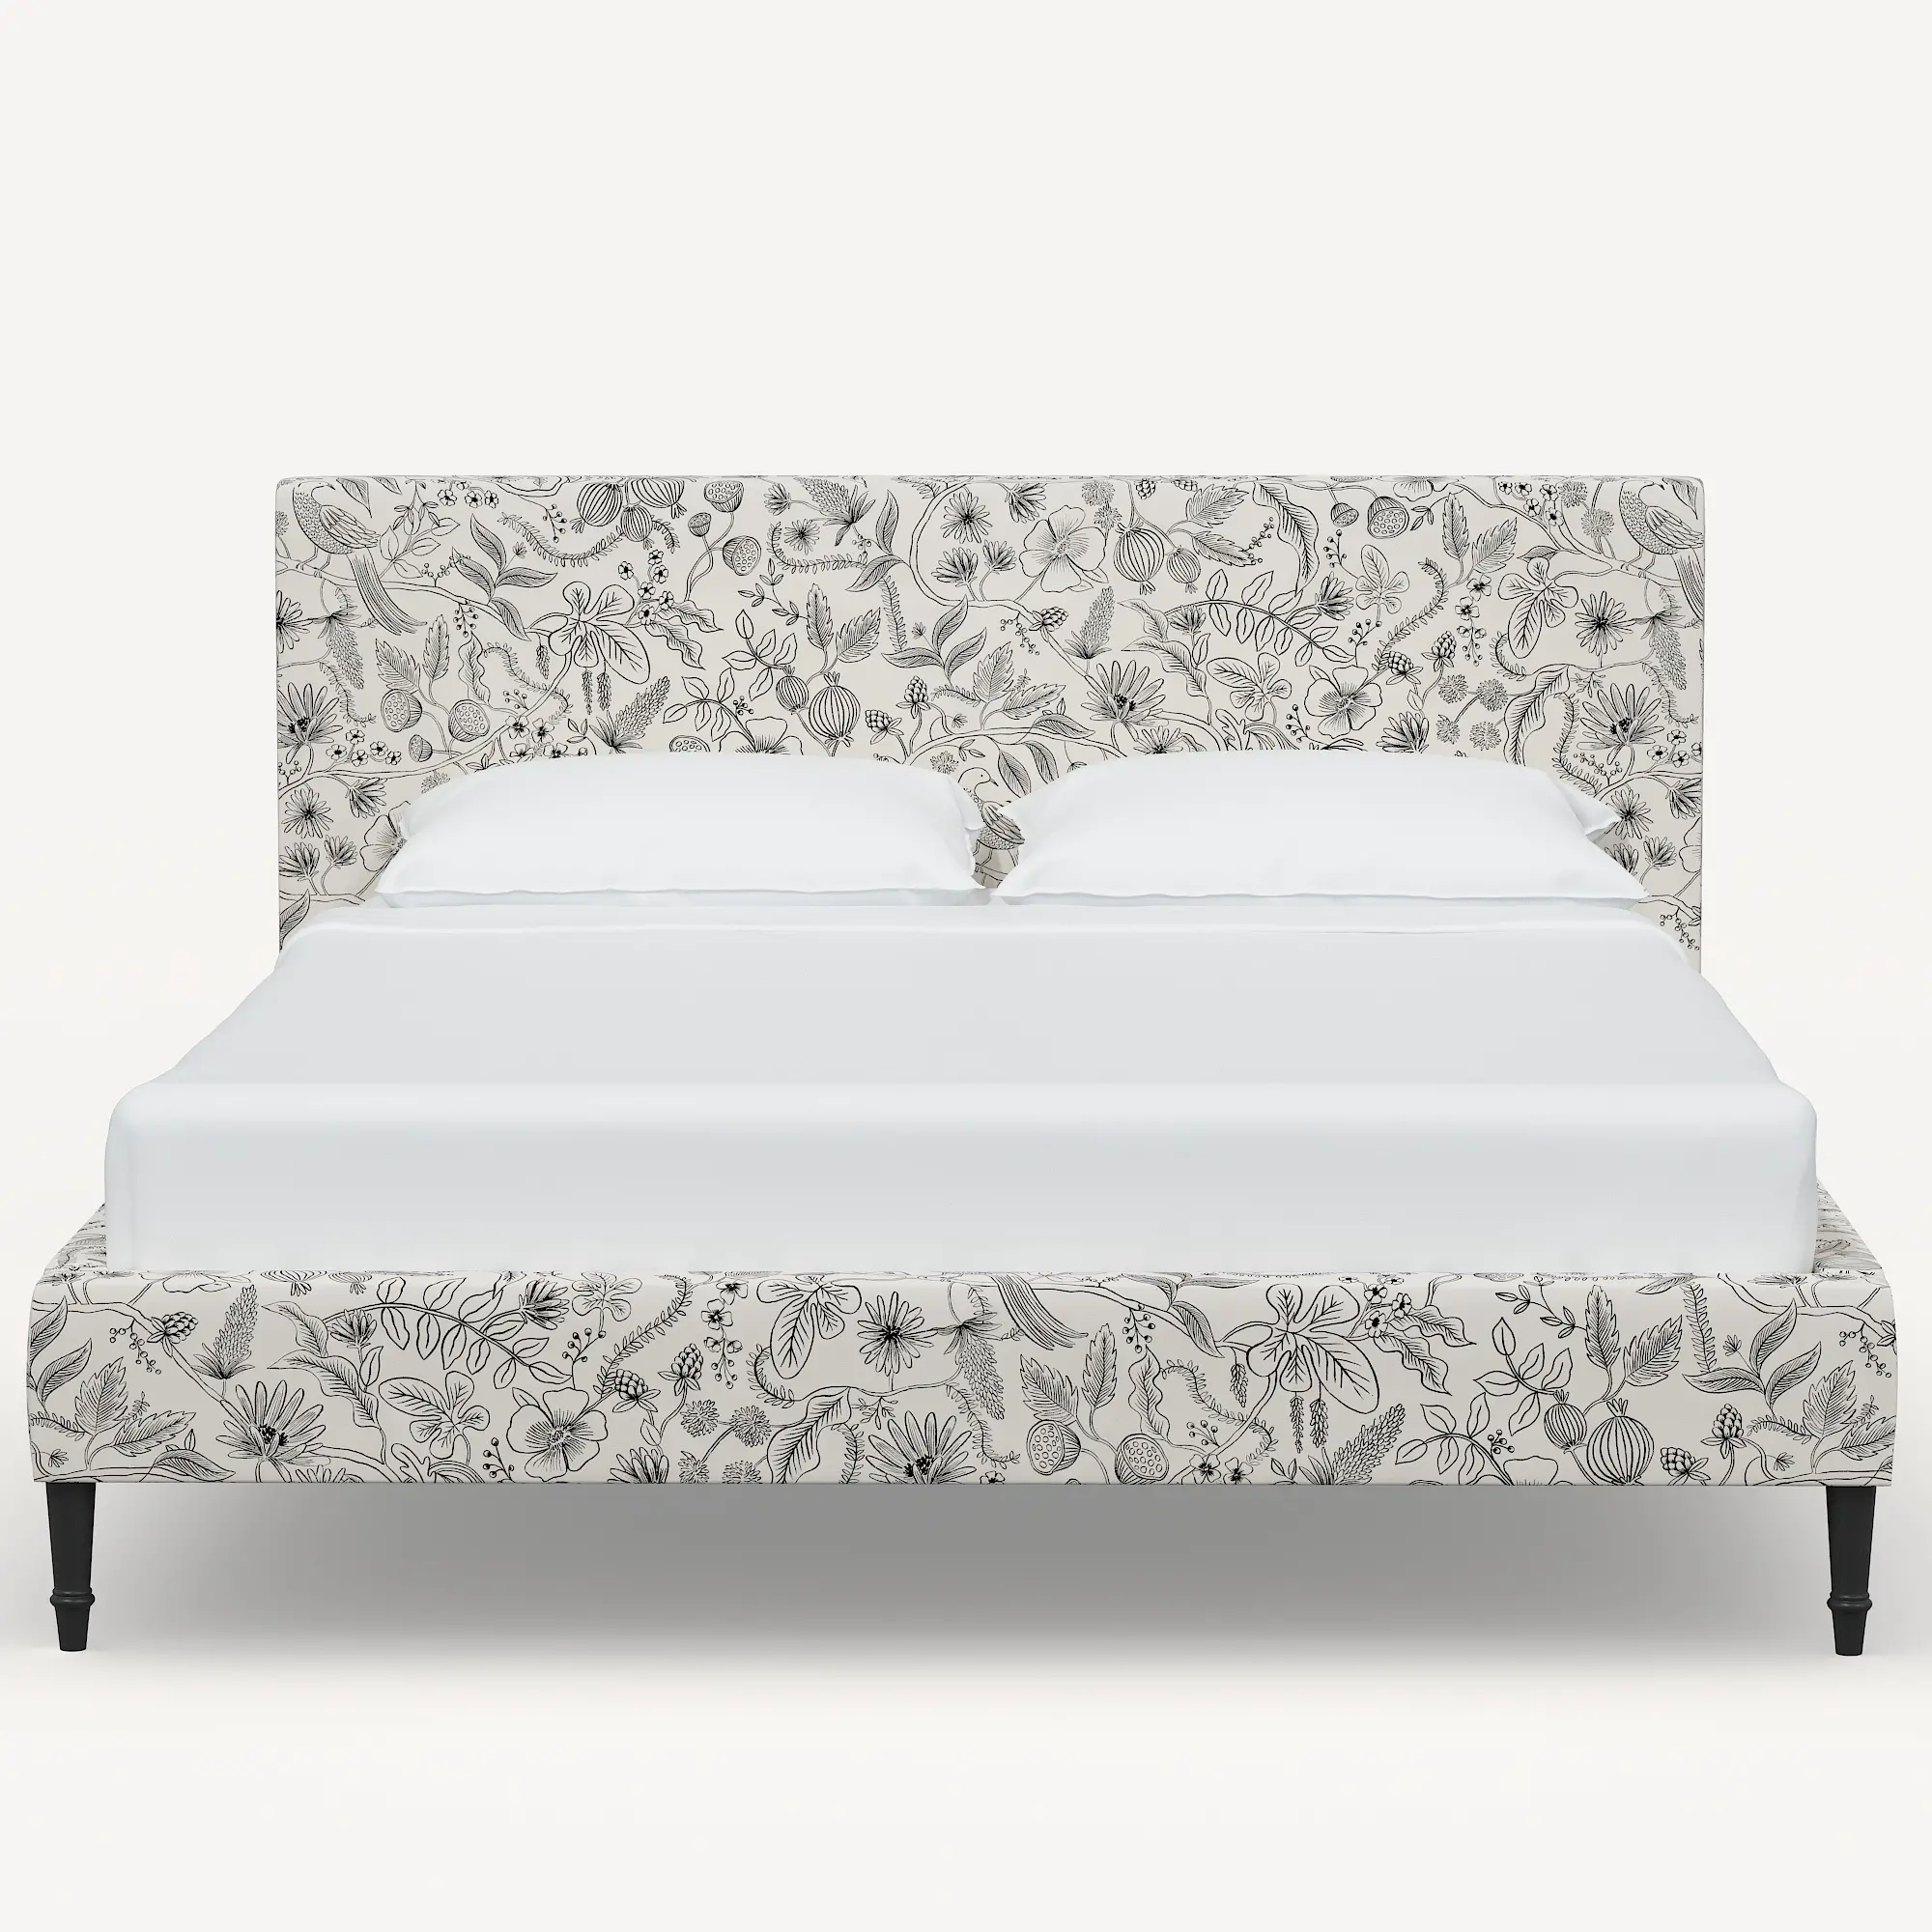 Rifle Paper Co Elly Aviary Cream & Black Twin Platform Bed